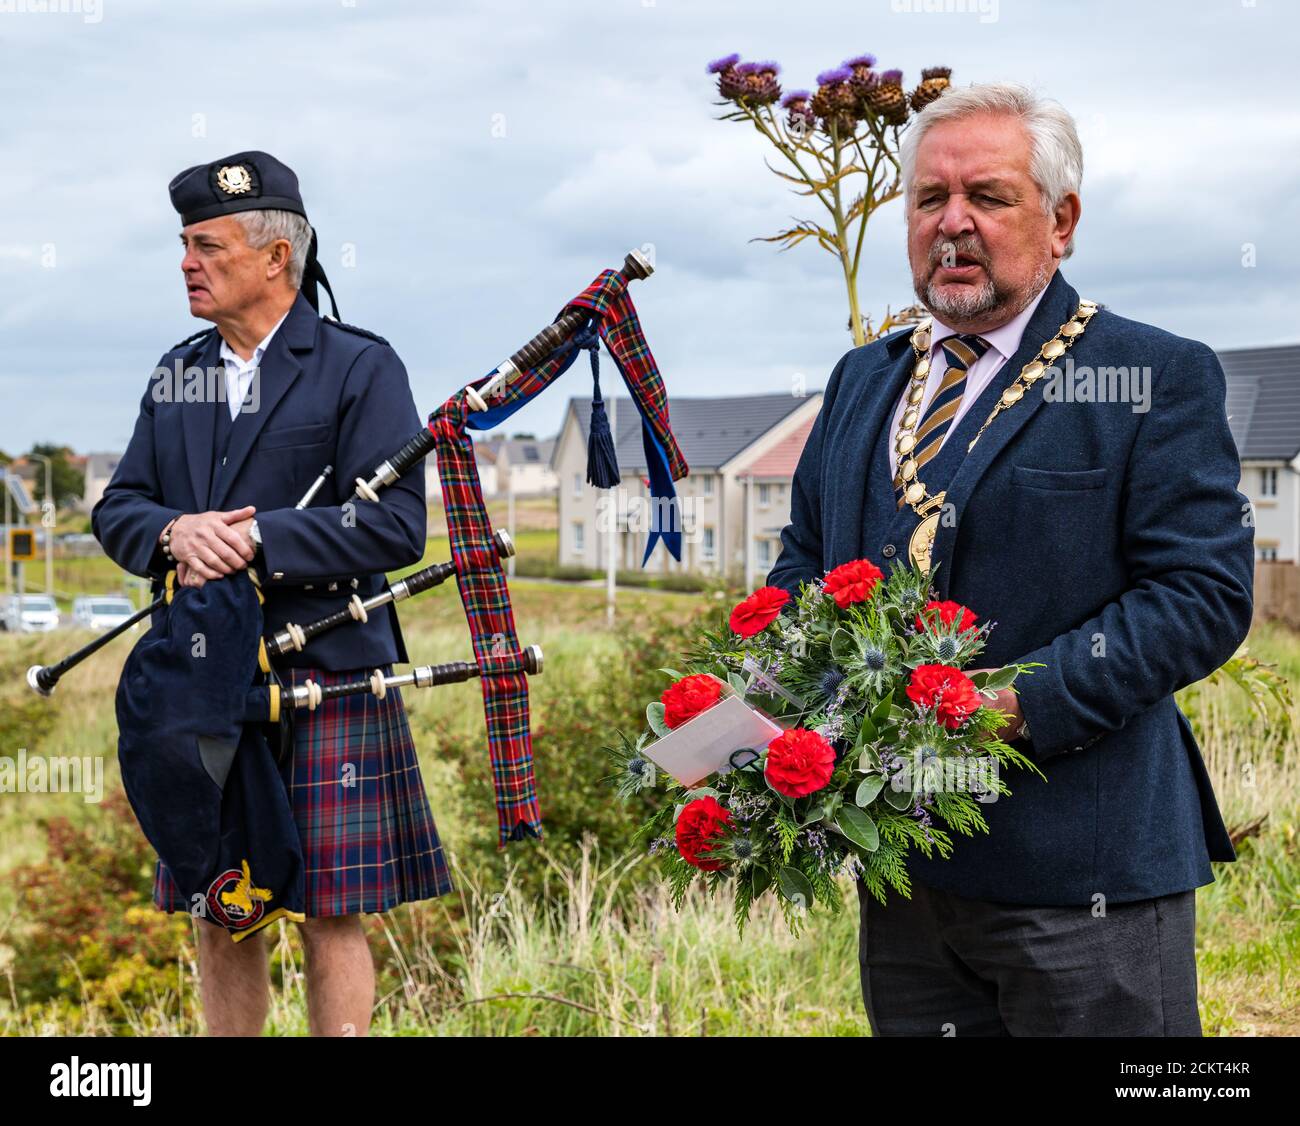 A piper with bagpipes & Provost John McmIllan with wreath at the Battle of Pinkie Cleugh commemoration, East Lothian, Scotland, UK Stock Photo